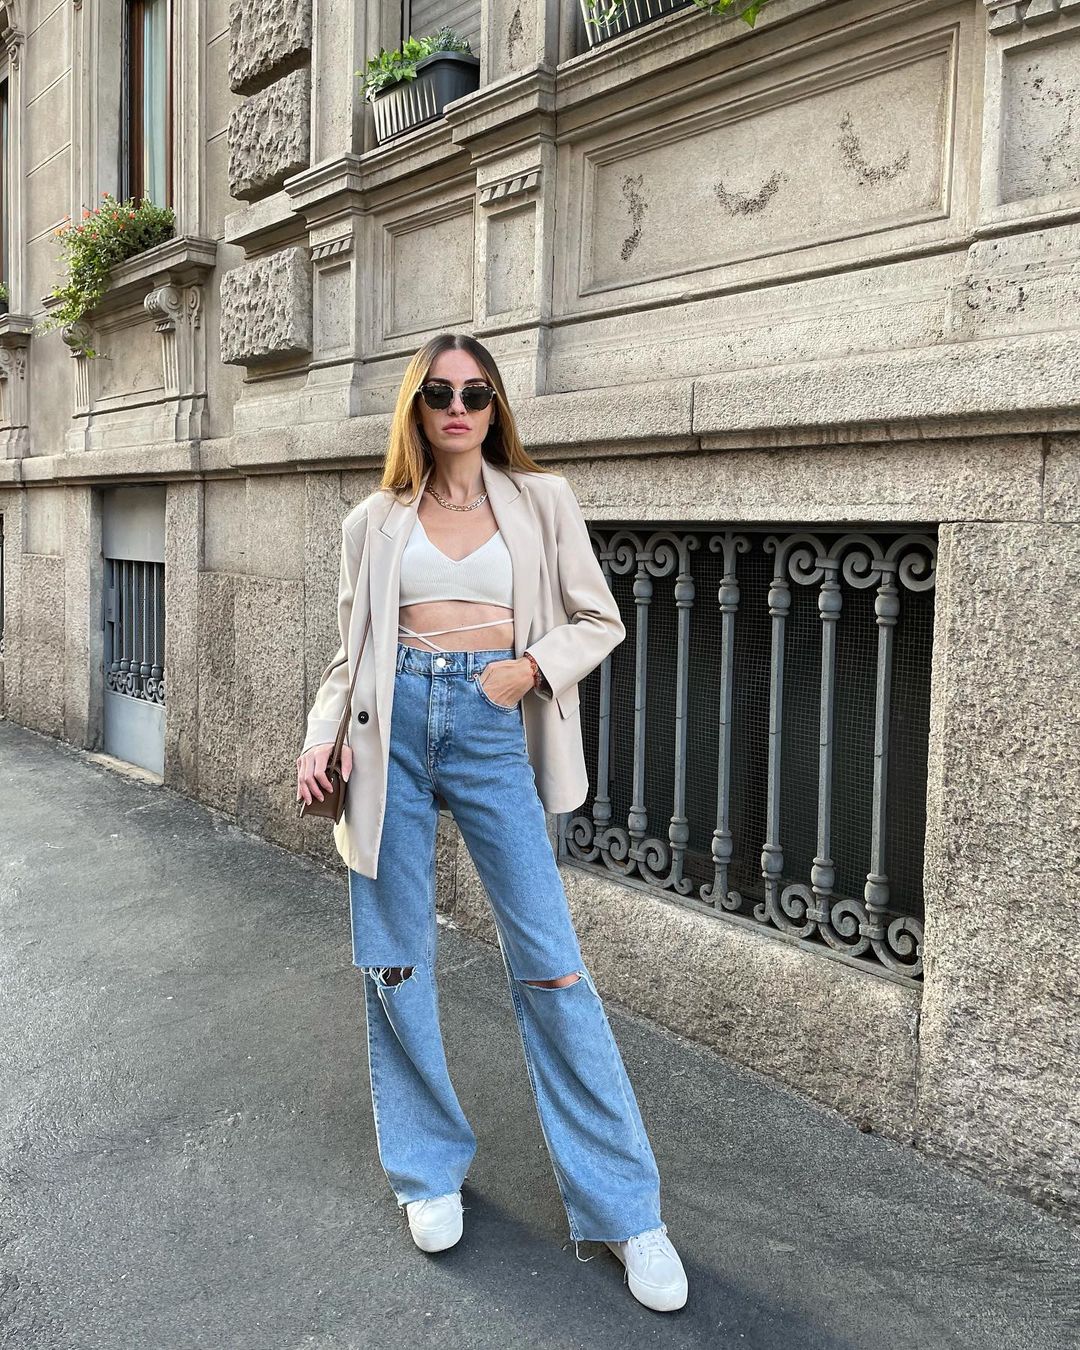 These Trendiest Jeans For Spring Wardrobe Will Be Your Next Denim Purchase